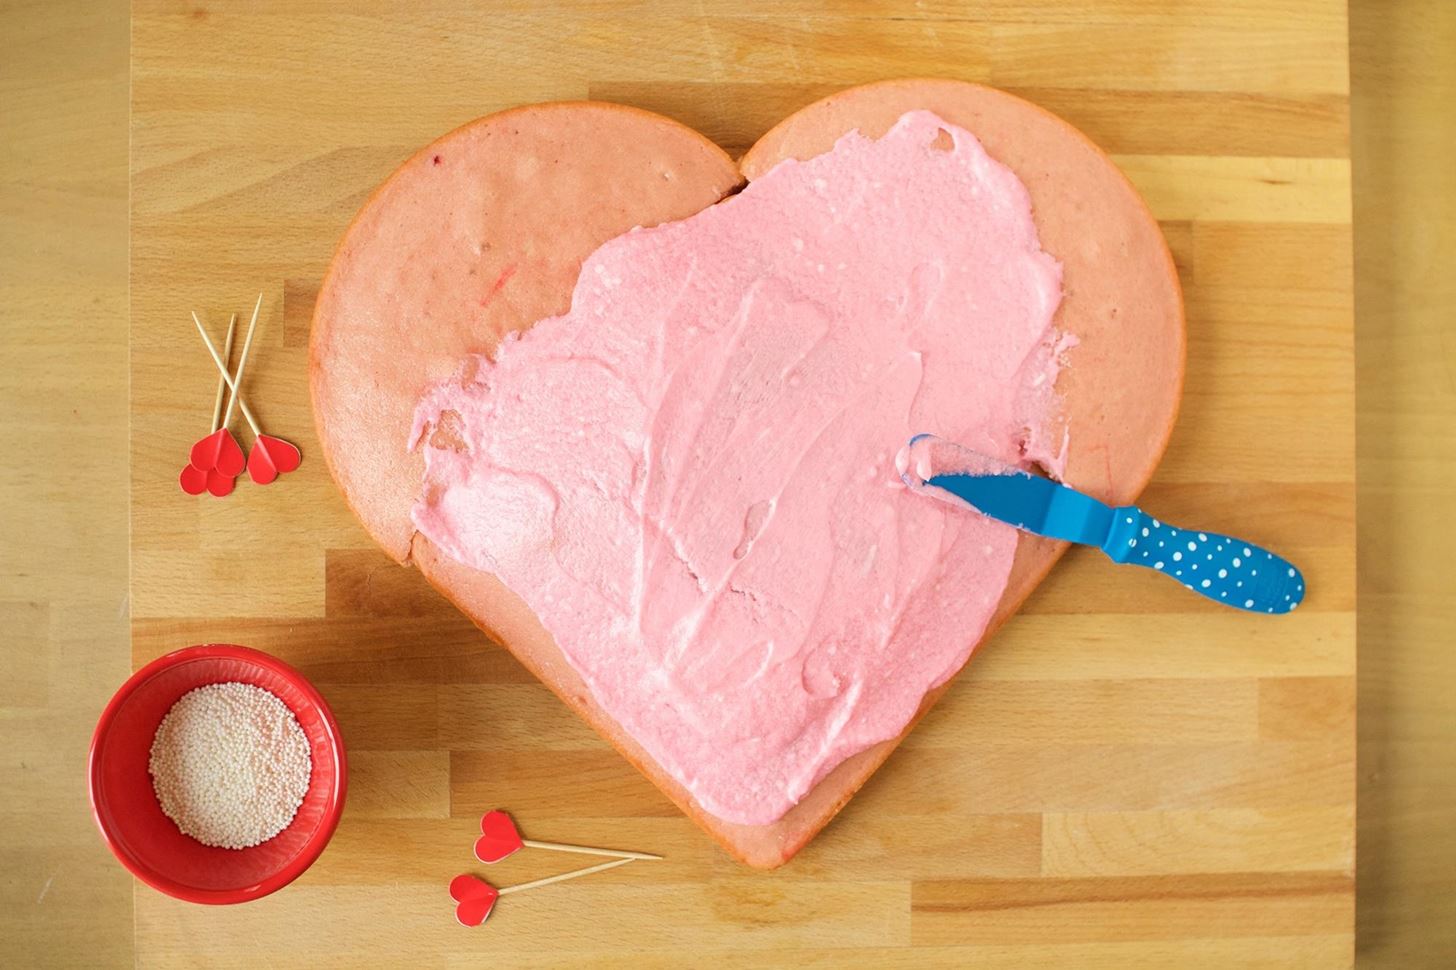 How to Make a Gorgeous Heart-Shaped Cake Without a Special Pan